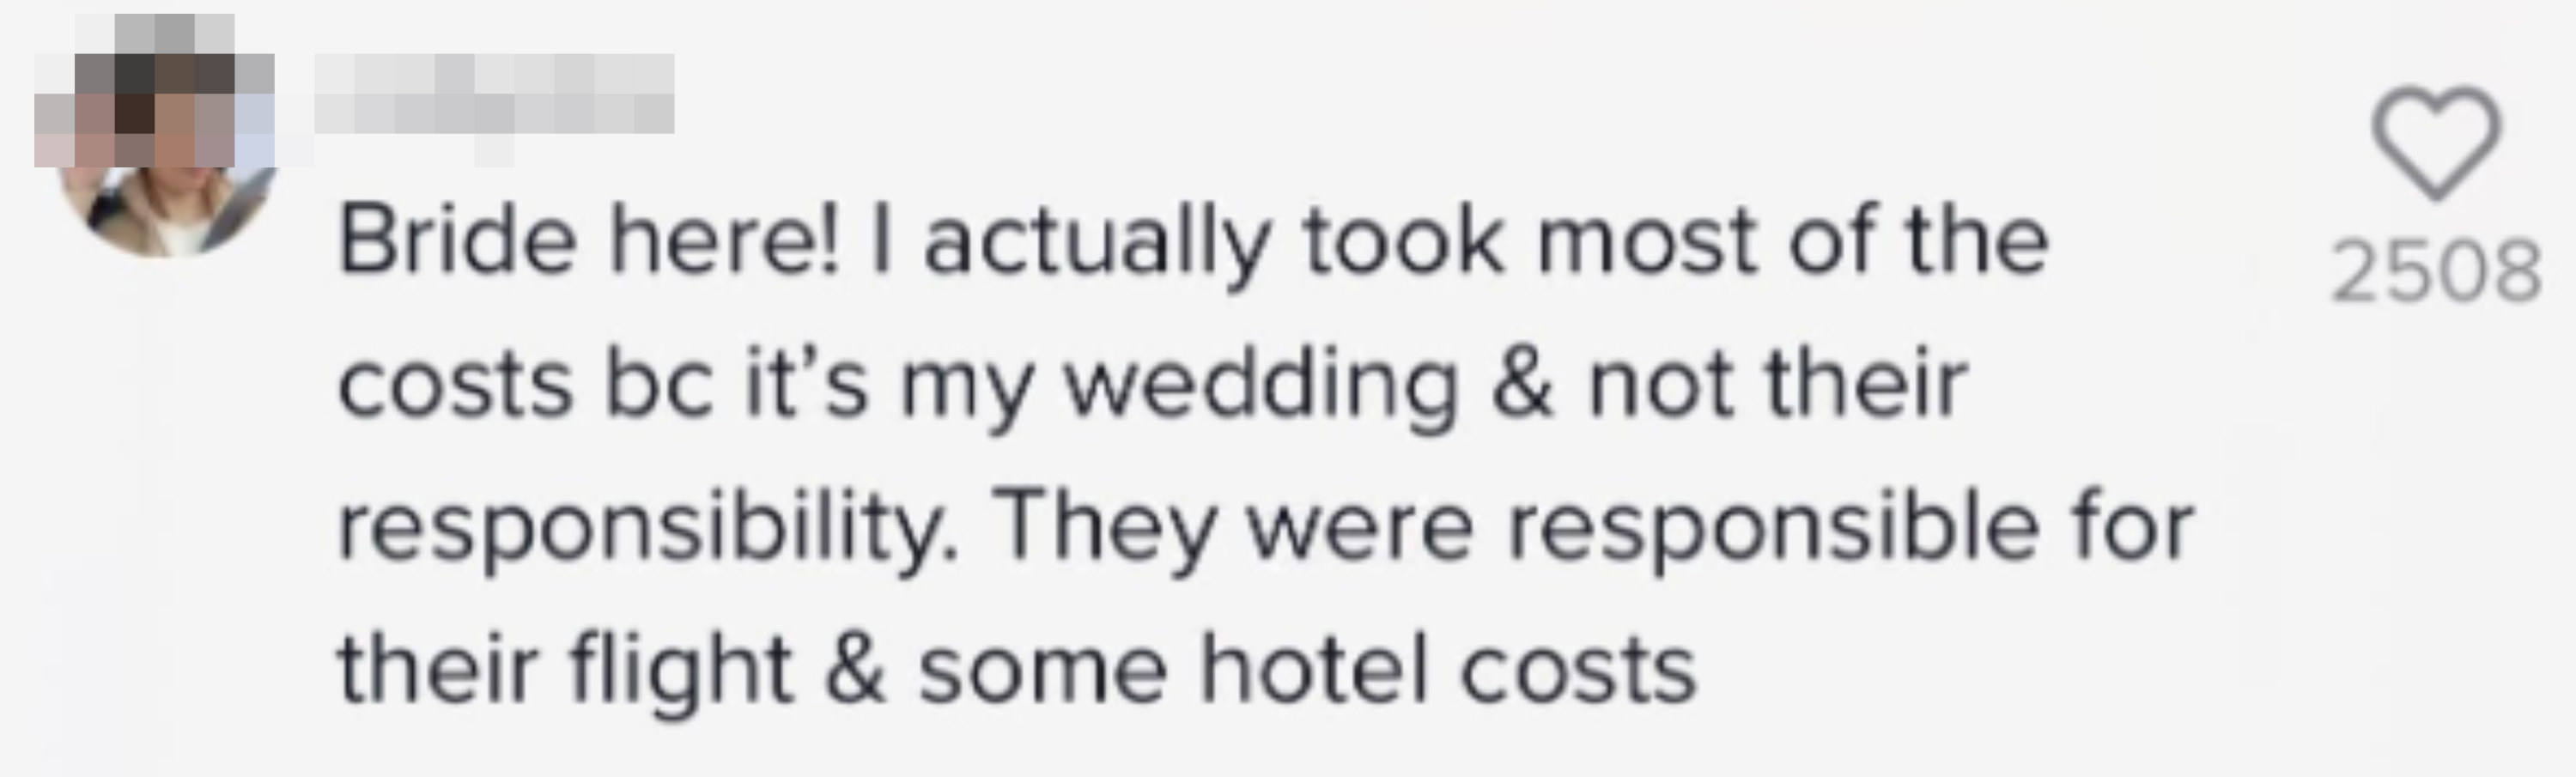 bride saying she took most of the cost since it&#x27;s her wedding